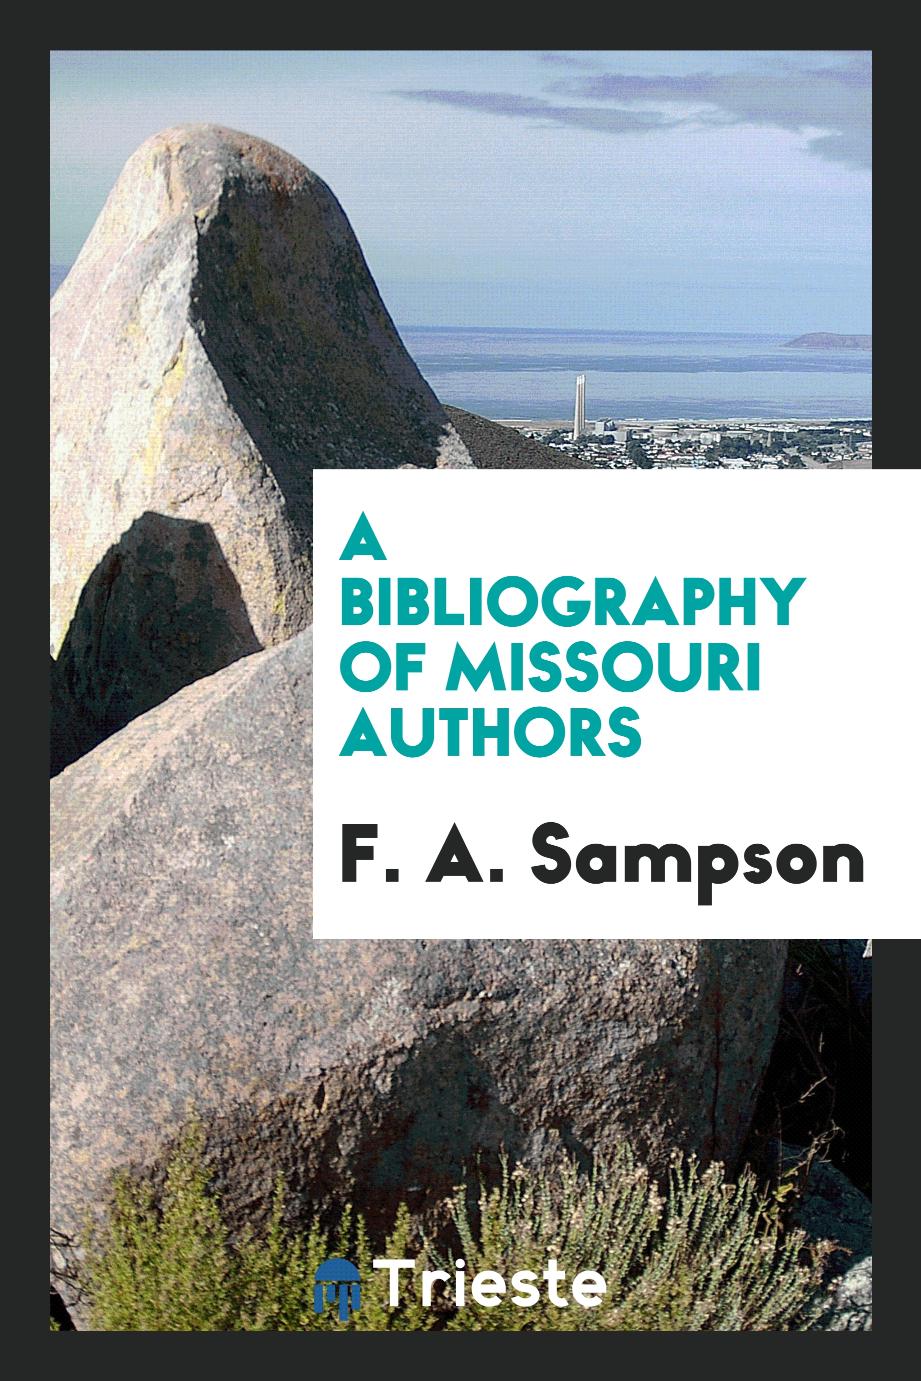 A Bibliography of Missouri Authors